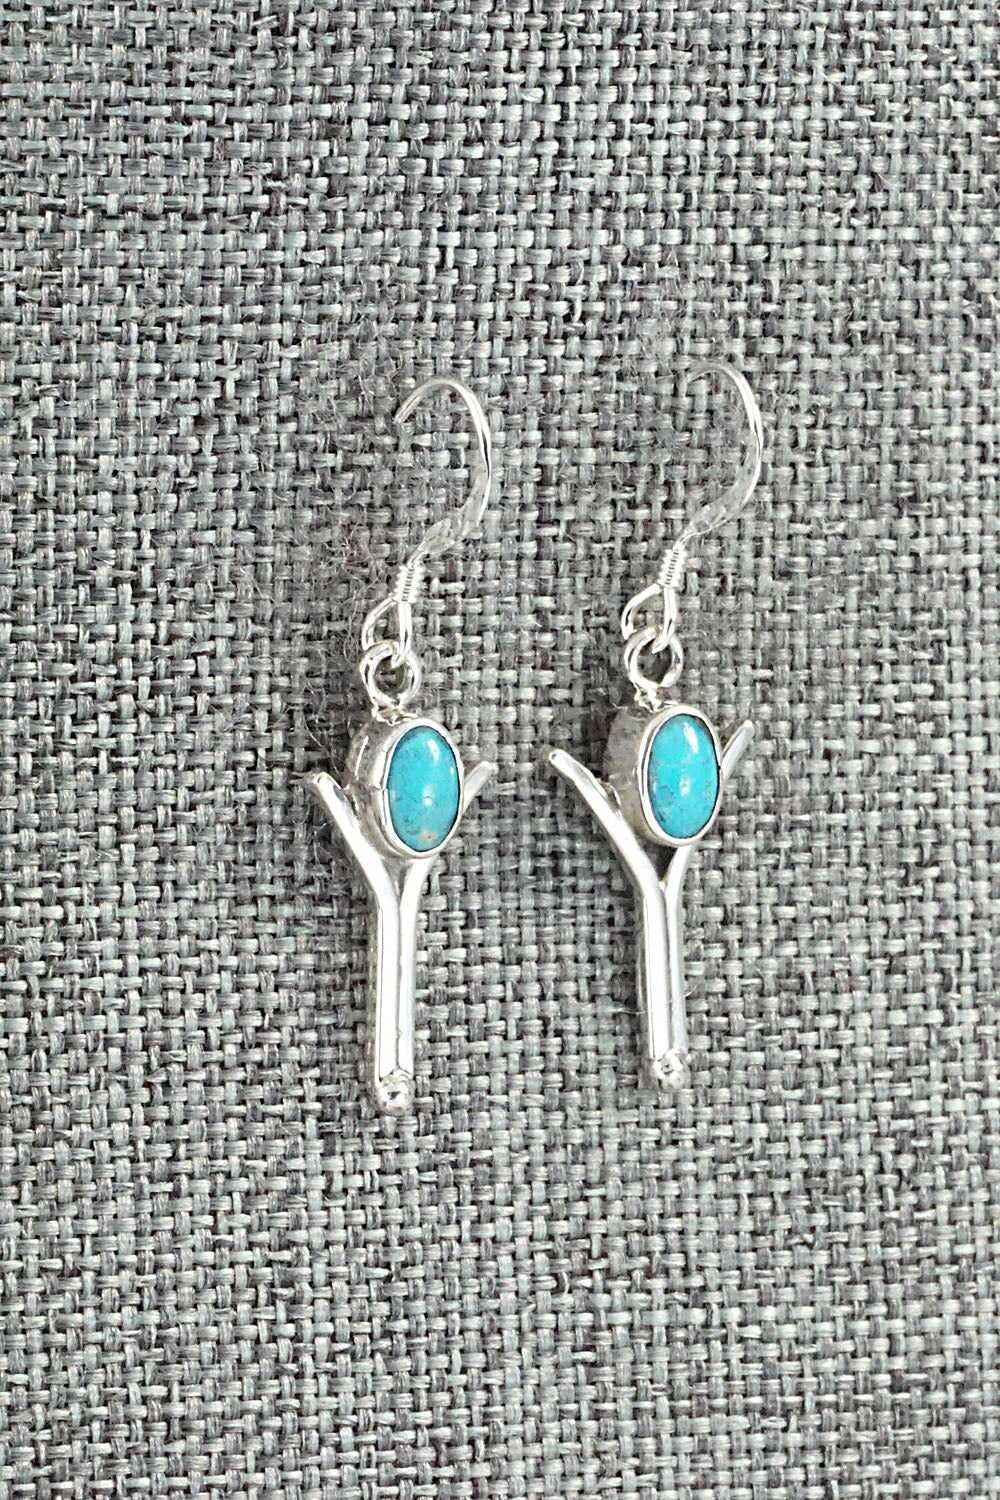 Turquoise & Sterling Silver Earrings - Gary Shorty